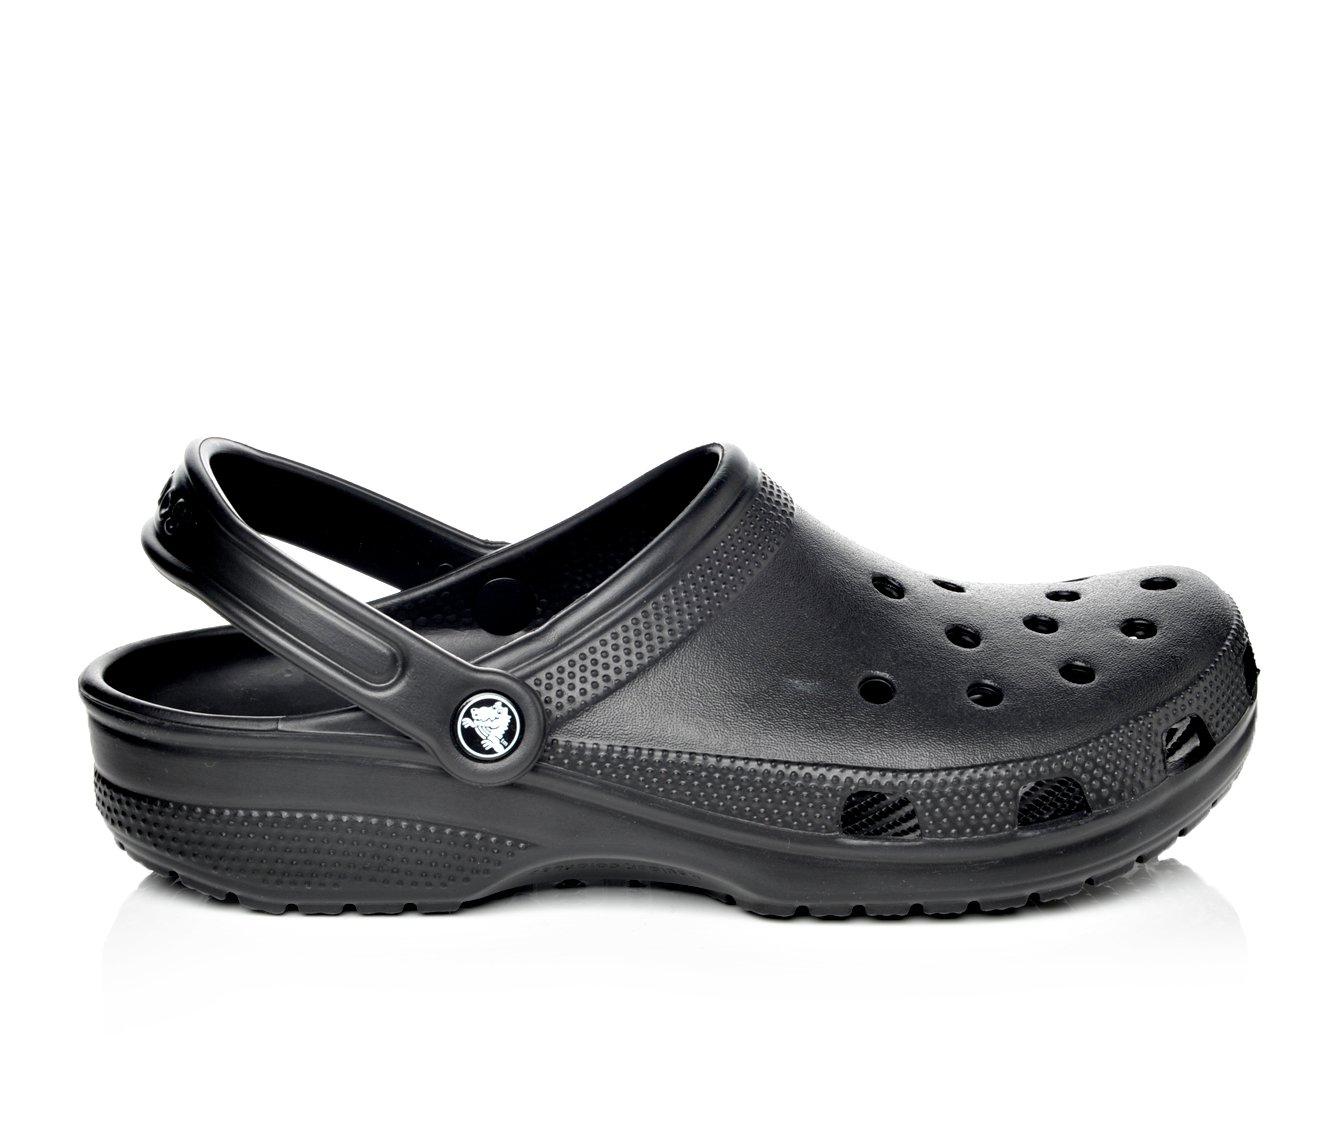 CROCS, Shoes, Custom Crocs Made To Order Price Includes Shoes Pick Your  Size And Color